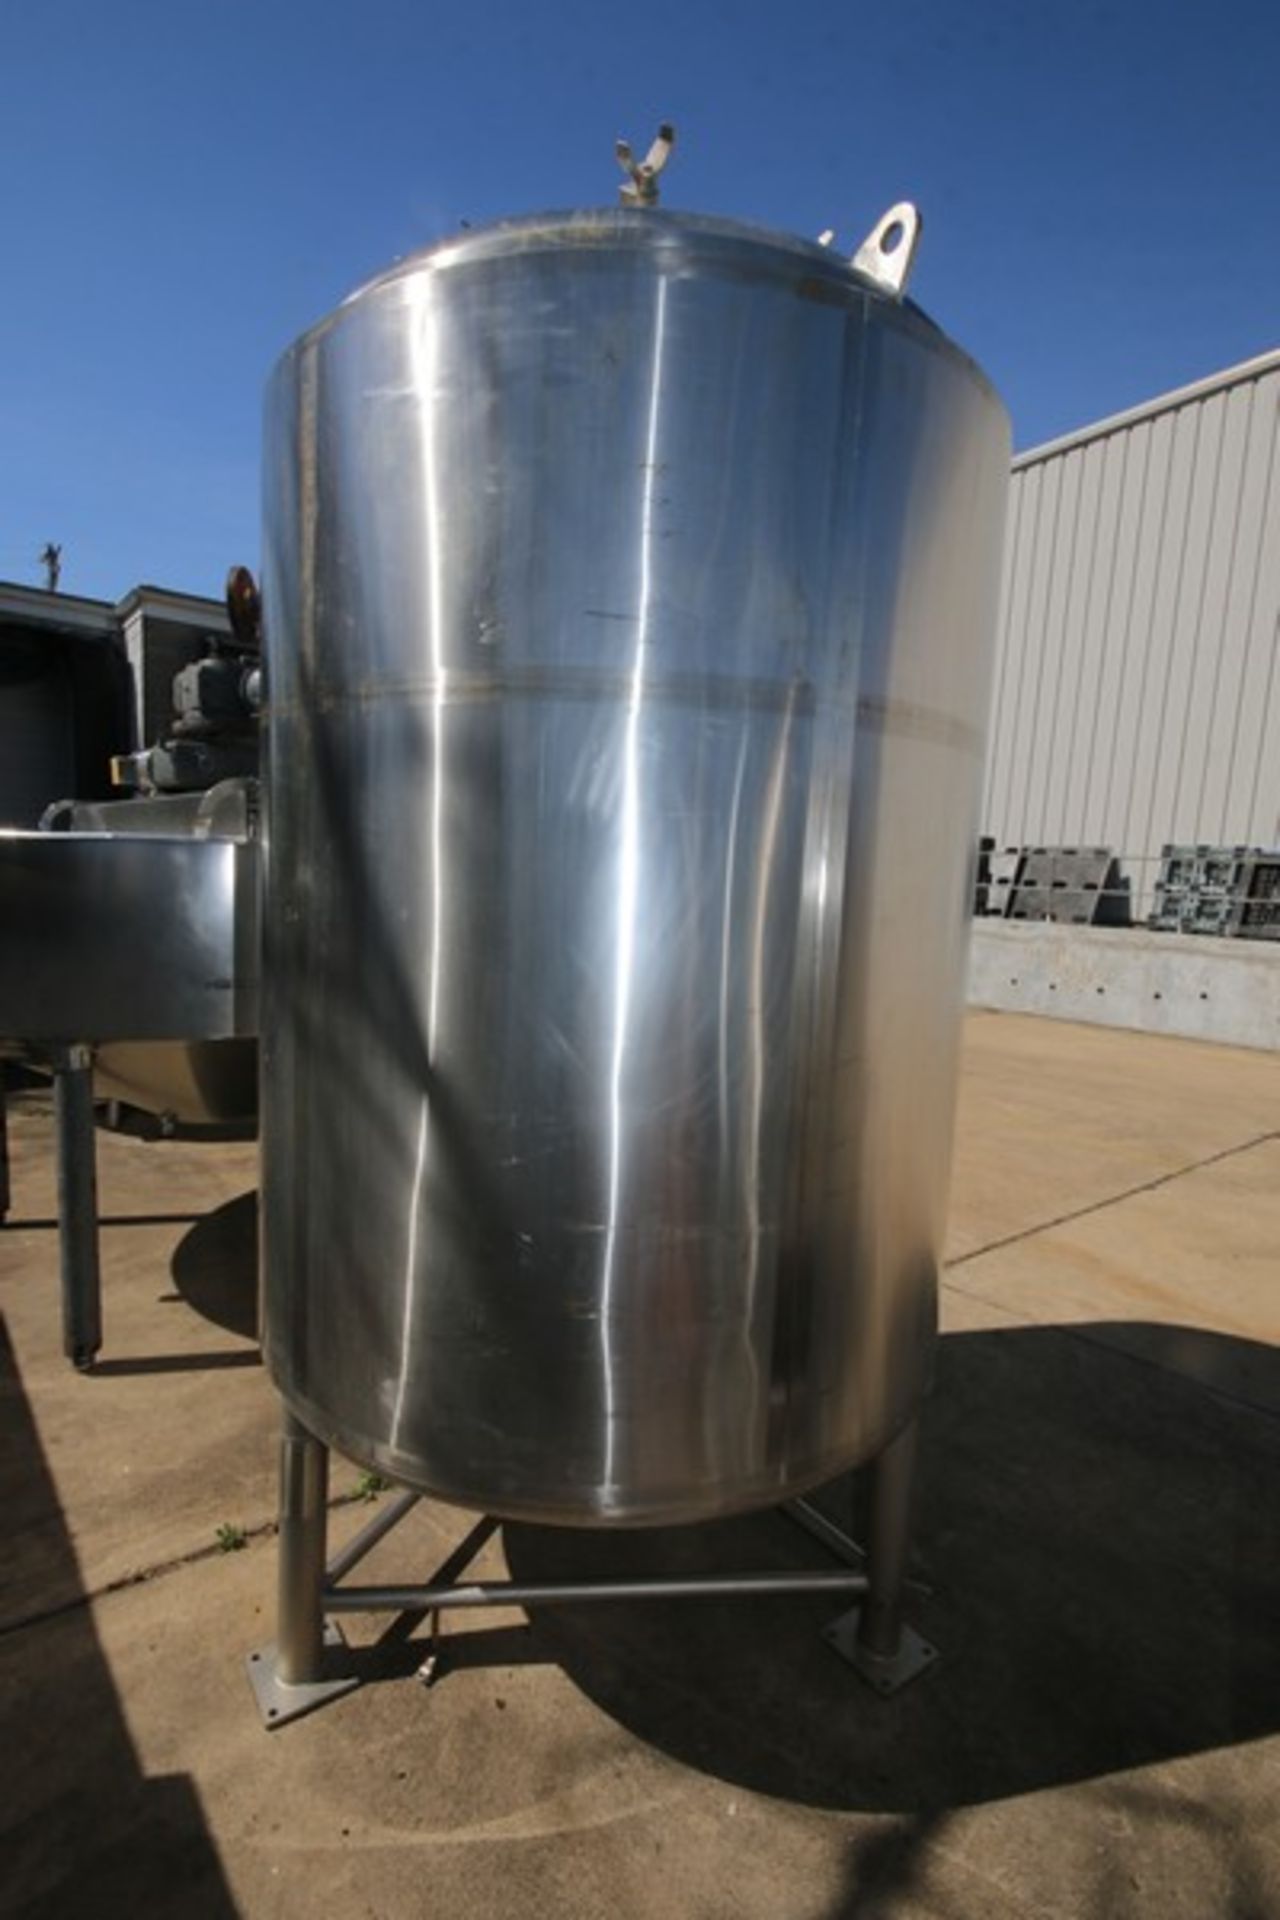 DCI Aprox. 660 (2500 Liter) Reactor Body, S/S Tank with Dished Heads, SN JS2295, Internal Rated 60 - Image 6 of 10